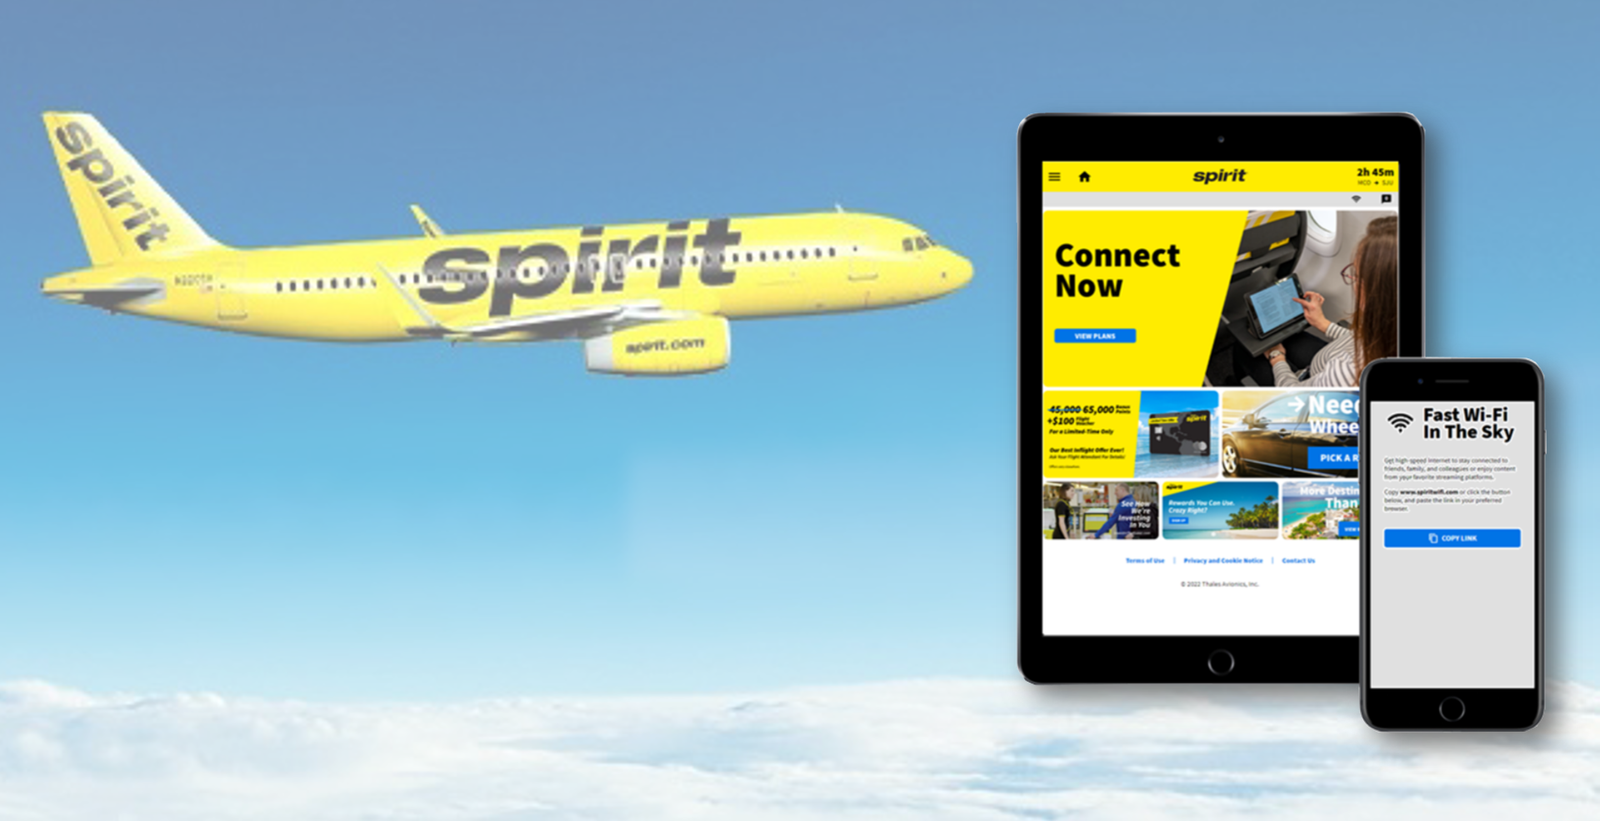 Spirit Airlines Passengers Enjoy Fast Wi-Fi in the Sky Enabled by High-Powered SES-17 Satellite